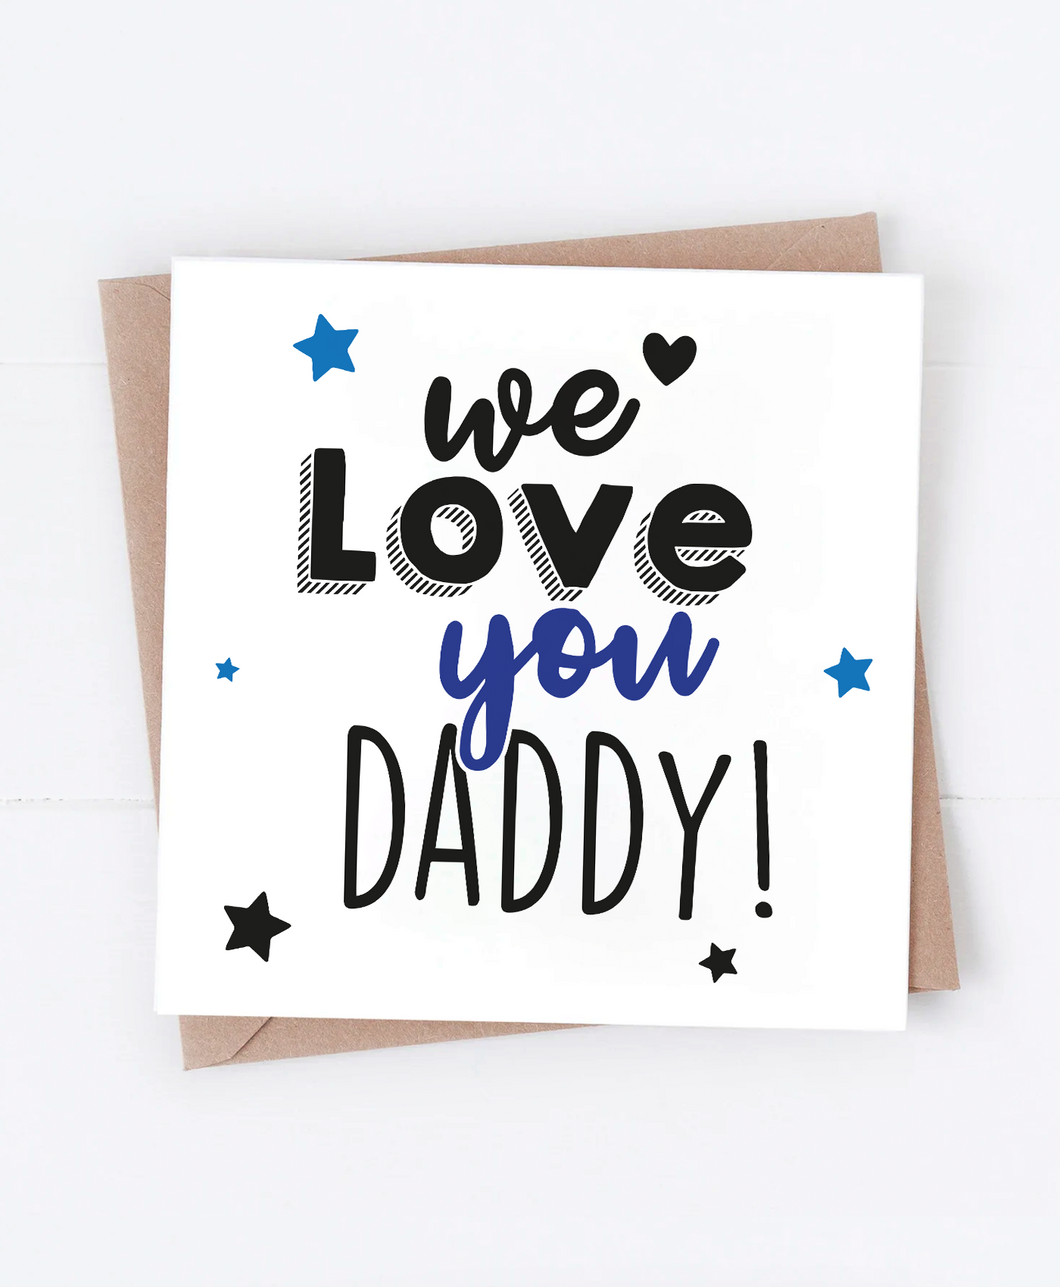 We Love You Daddy - Greetings Card